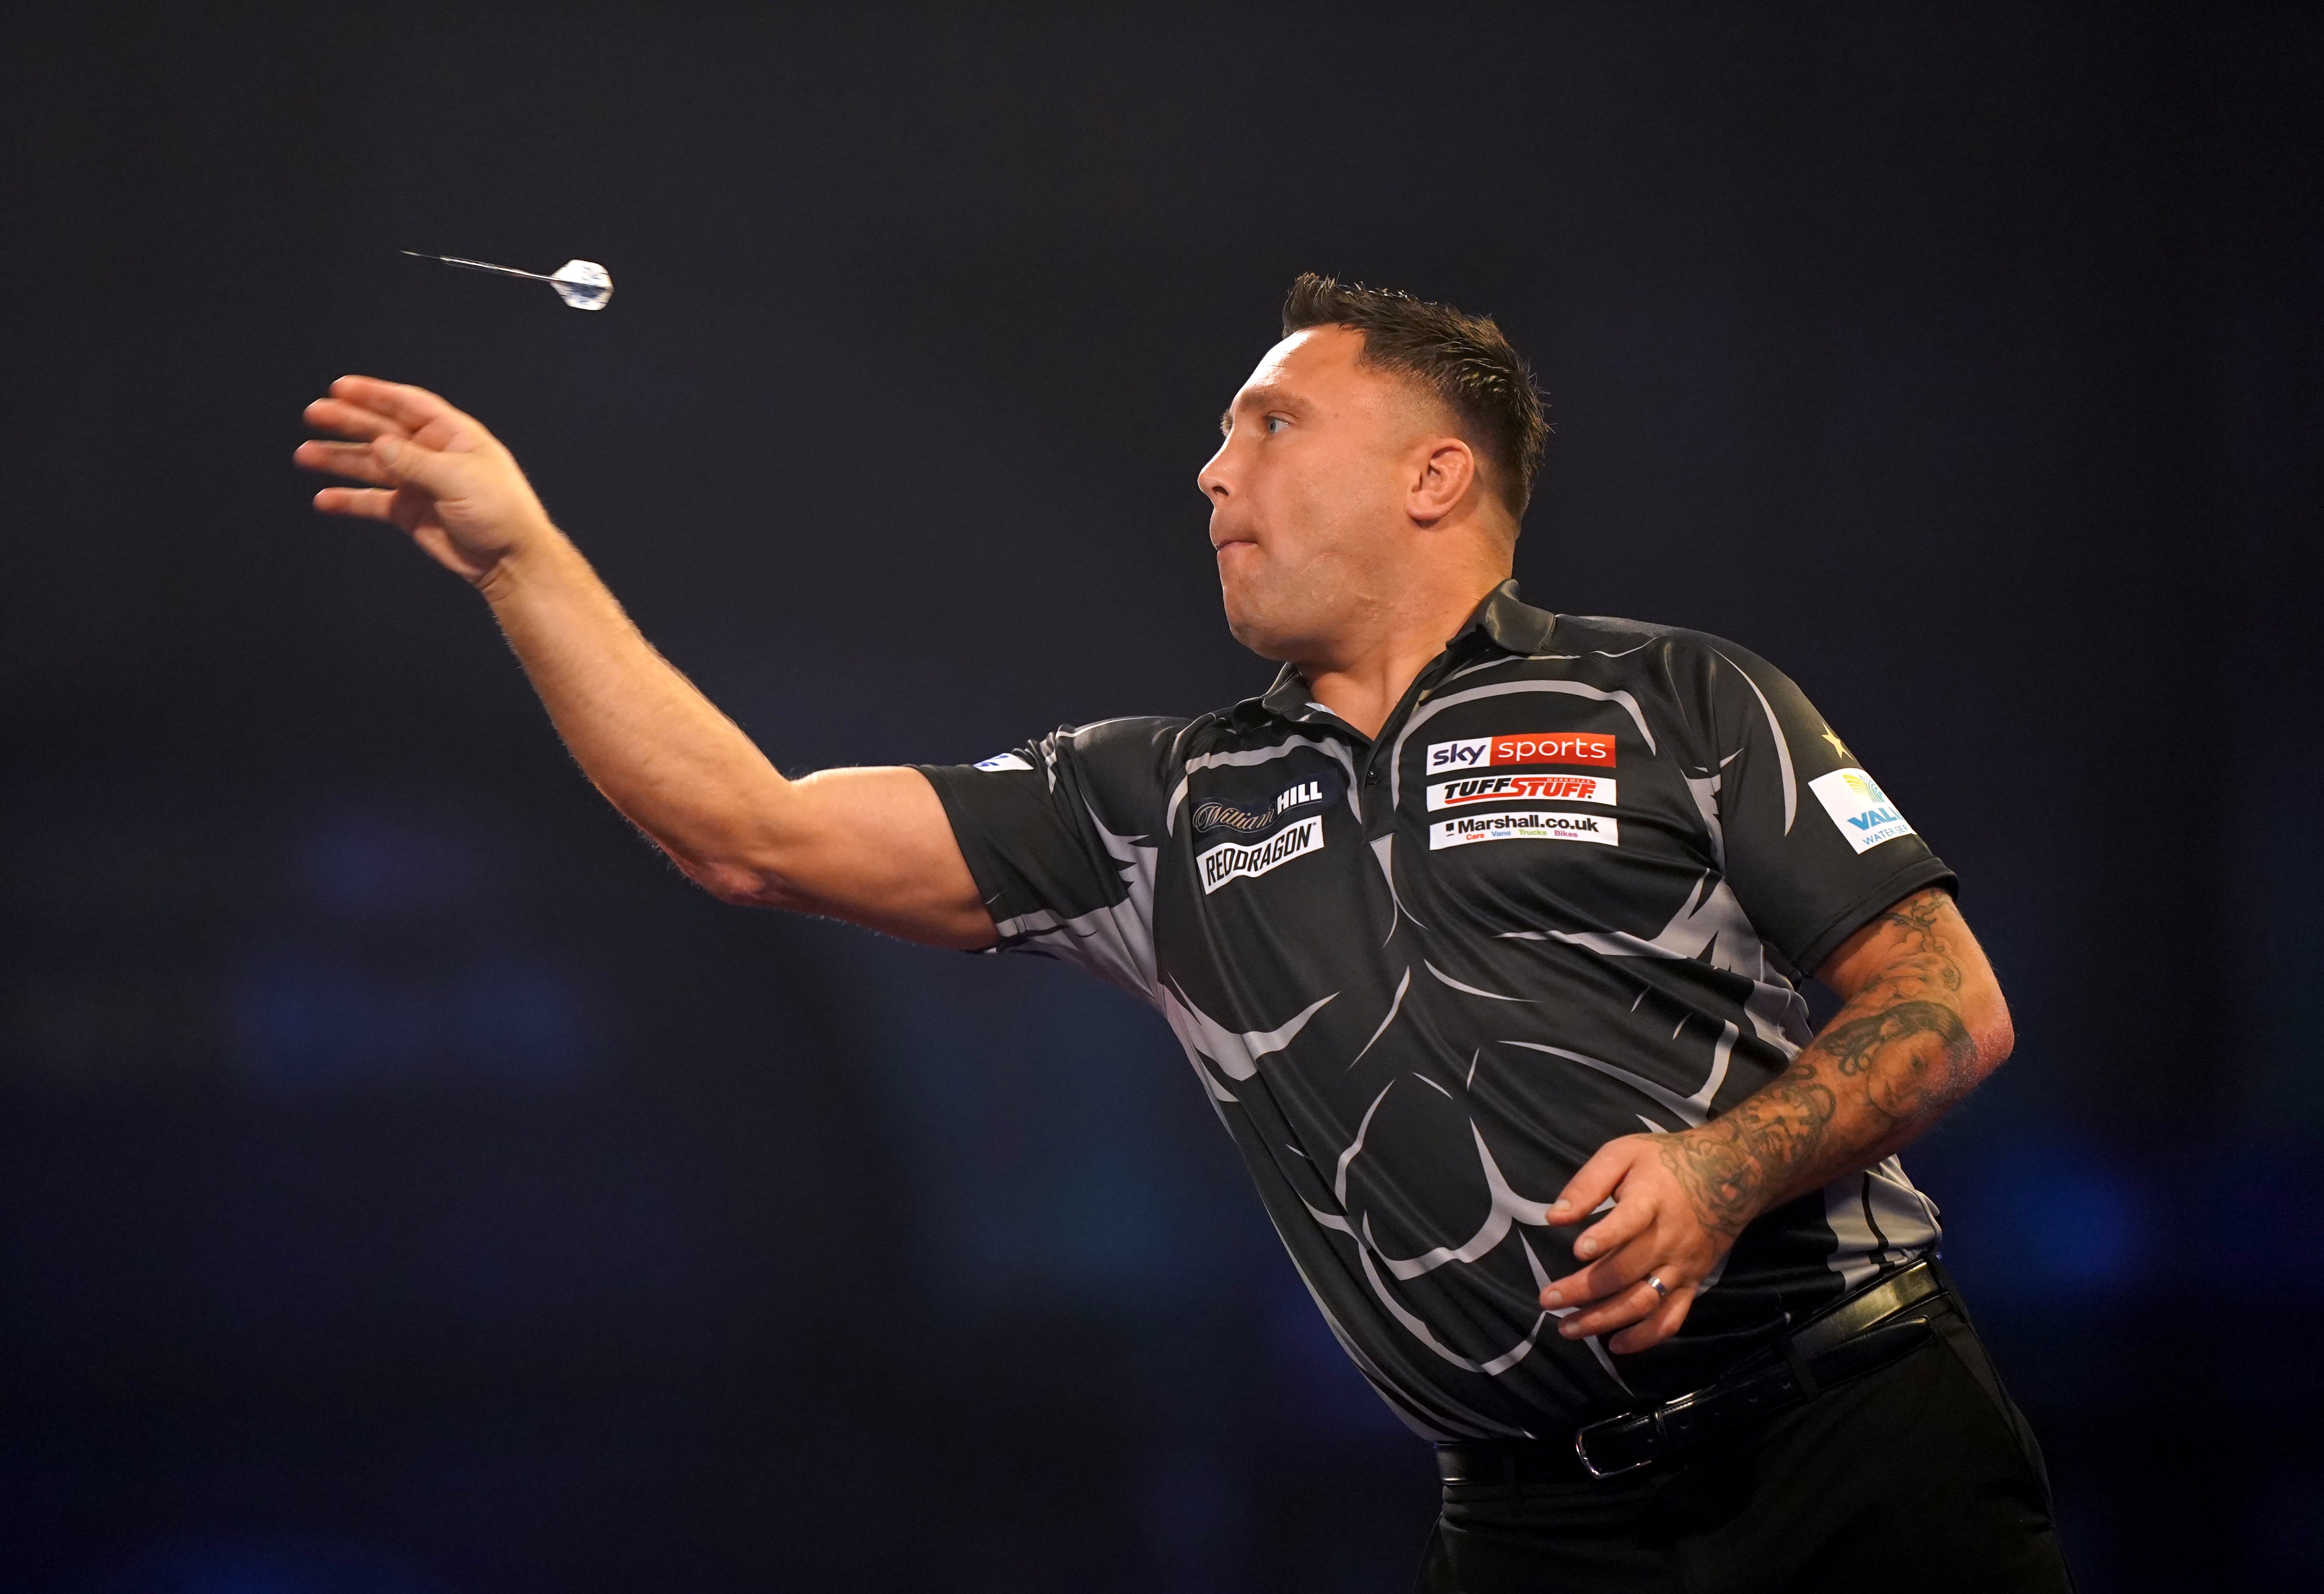 Iceman Gerwyn Price had been given a frosty reception from the crowd at Alexandra Palace (Kirsty O’Connor/PA)